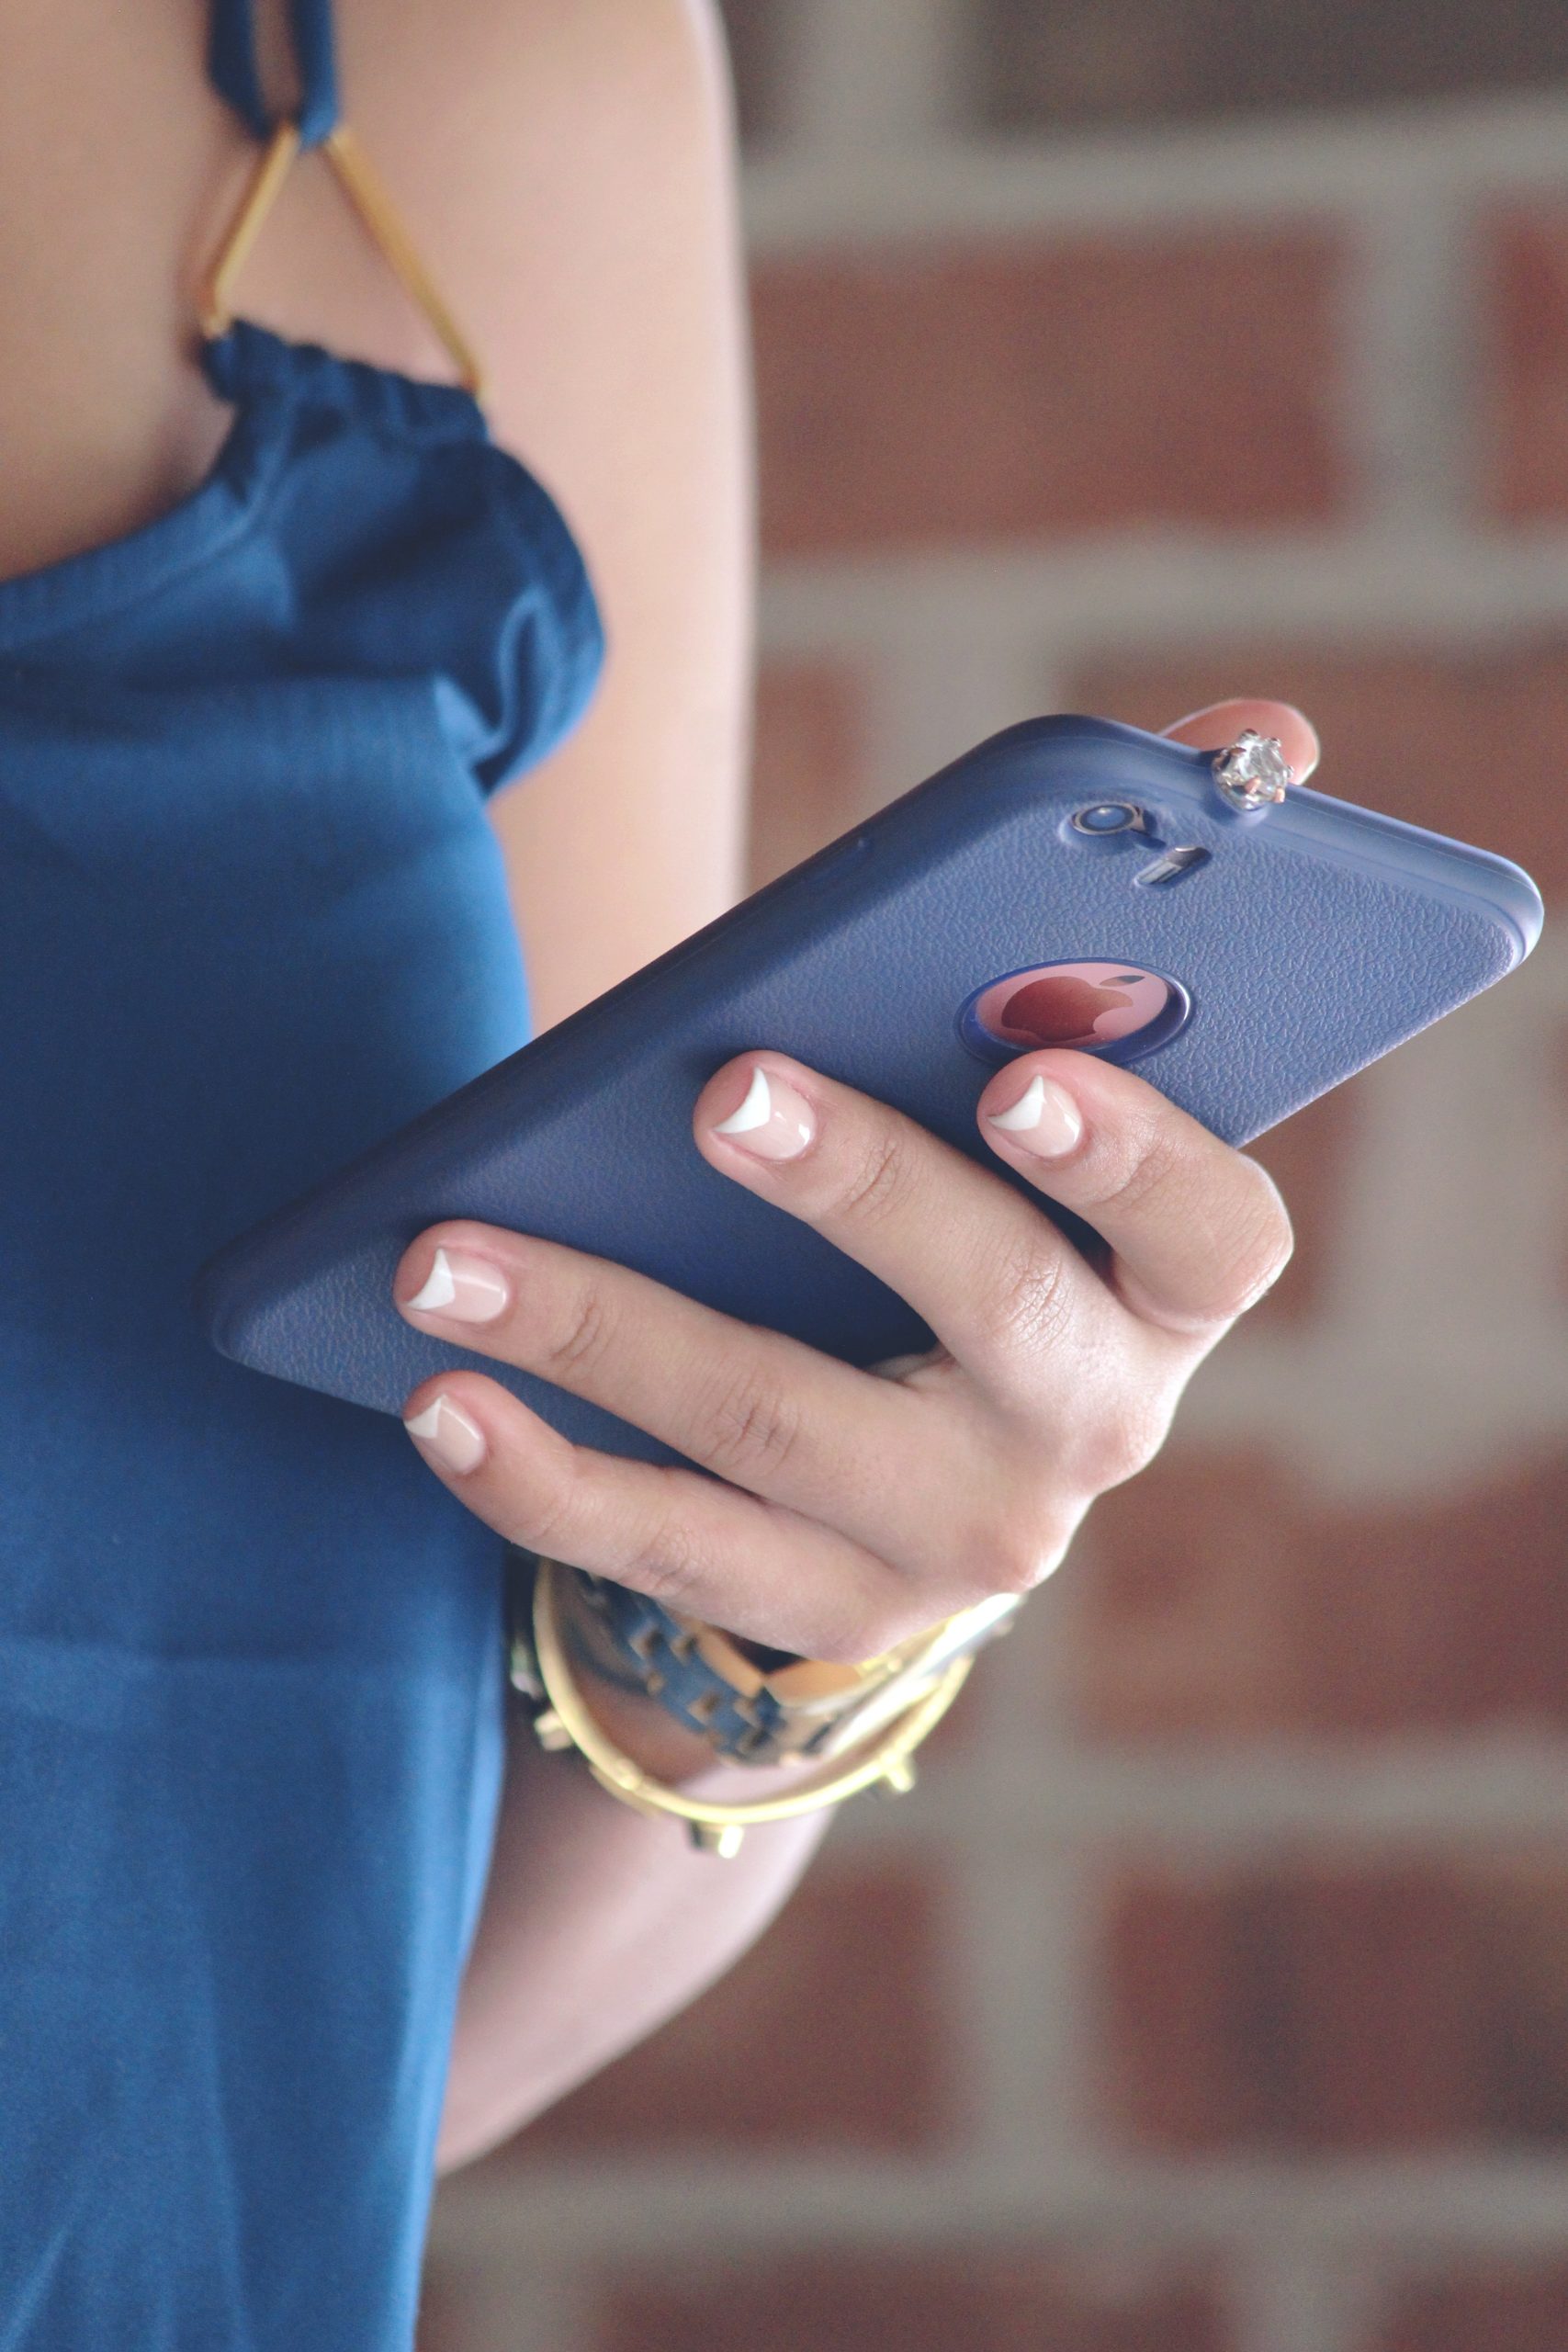 Upclose of woman holding her smartphone vertically in one hand